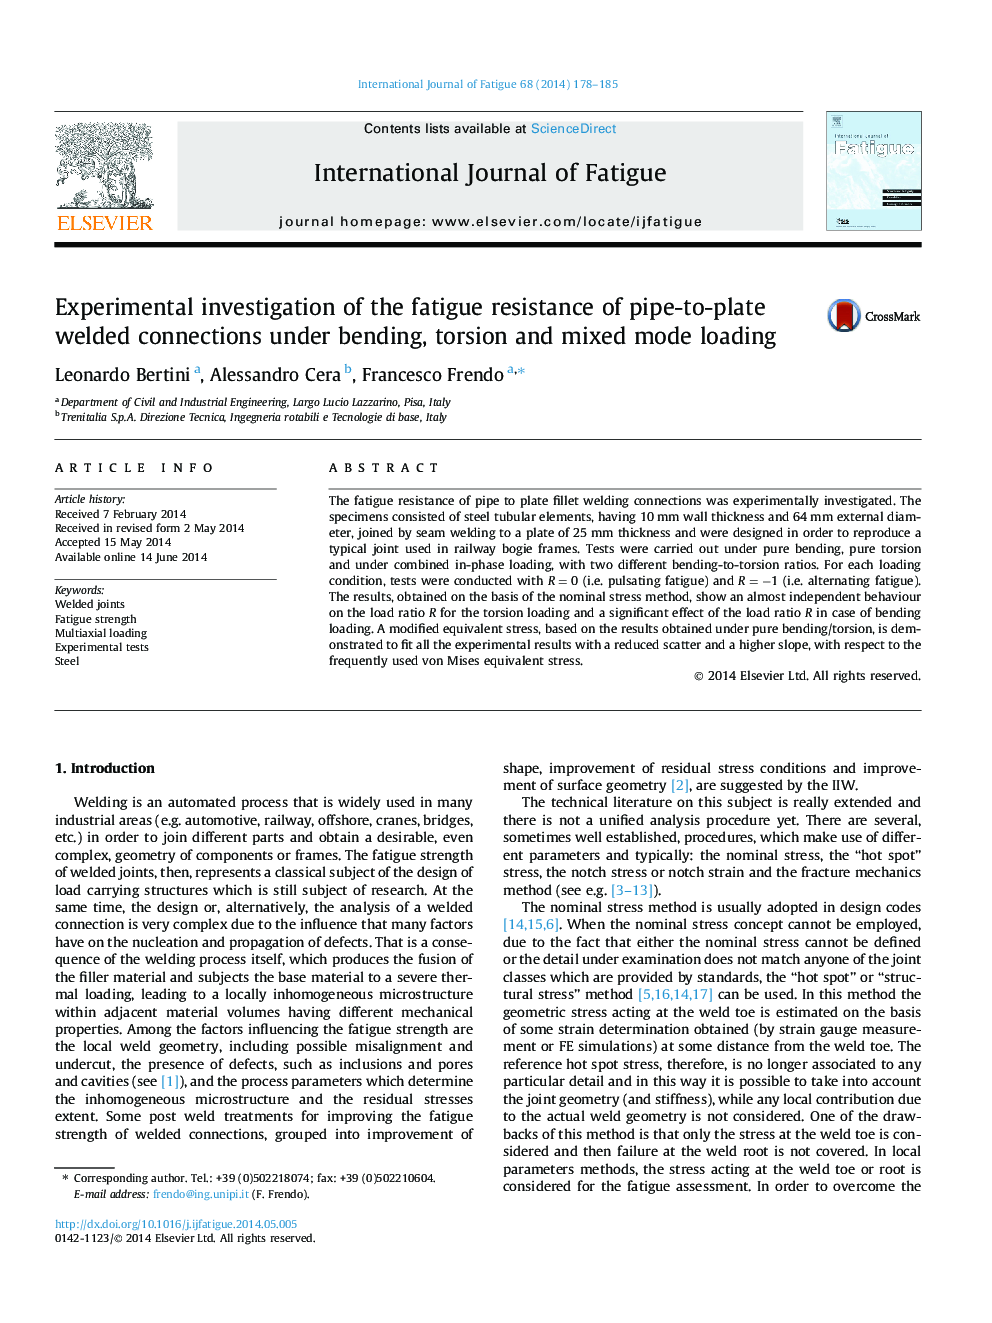 Experimental investigation of the fatigue resistance of pipe-to-plate welded connections under bending, torsion and mixed mode loading